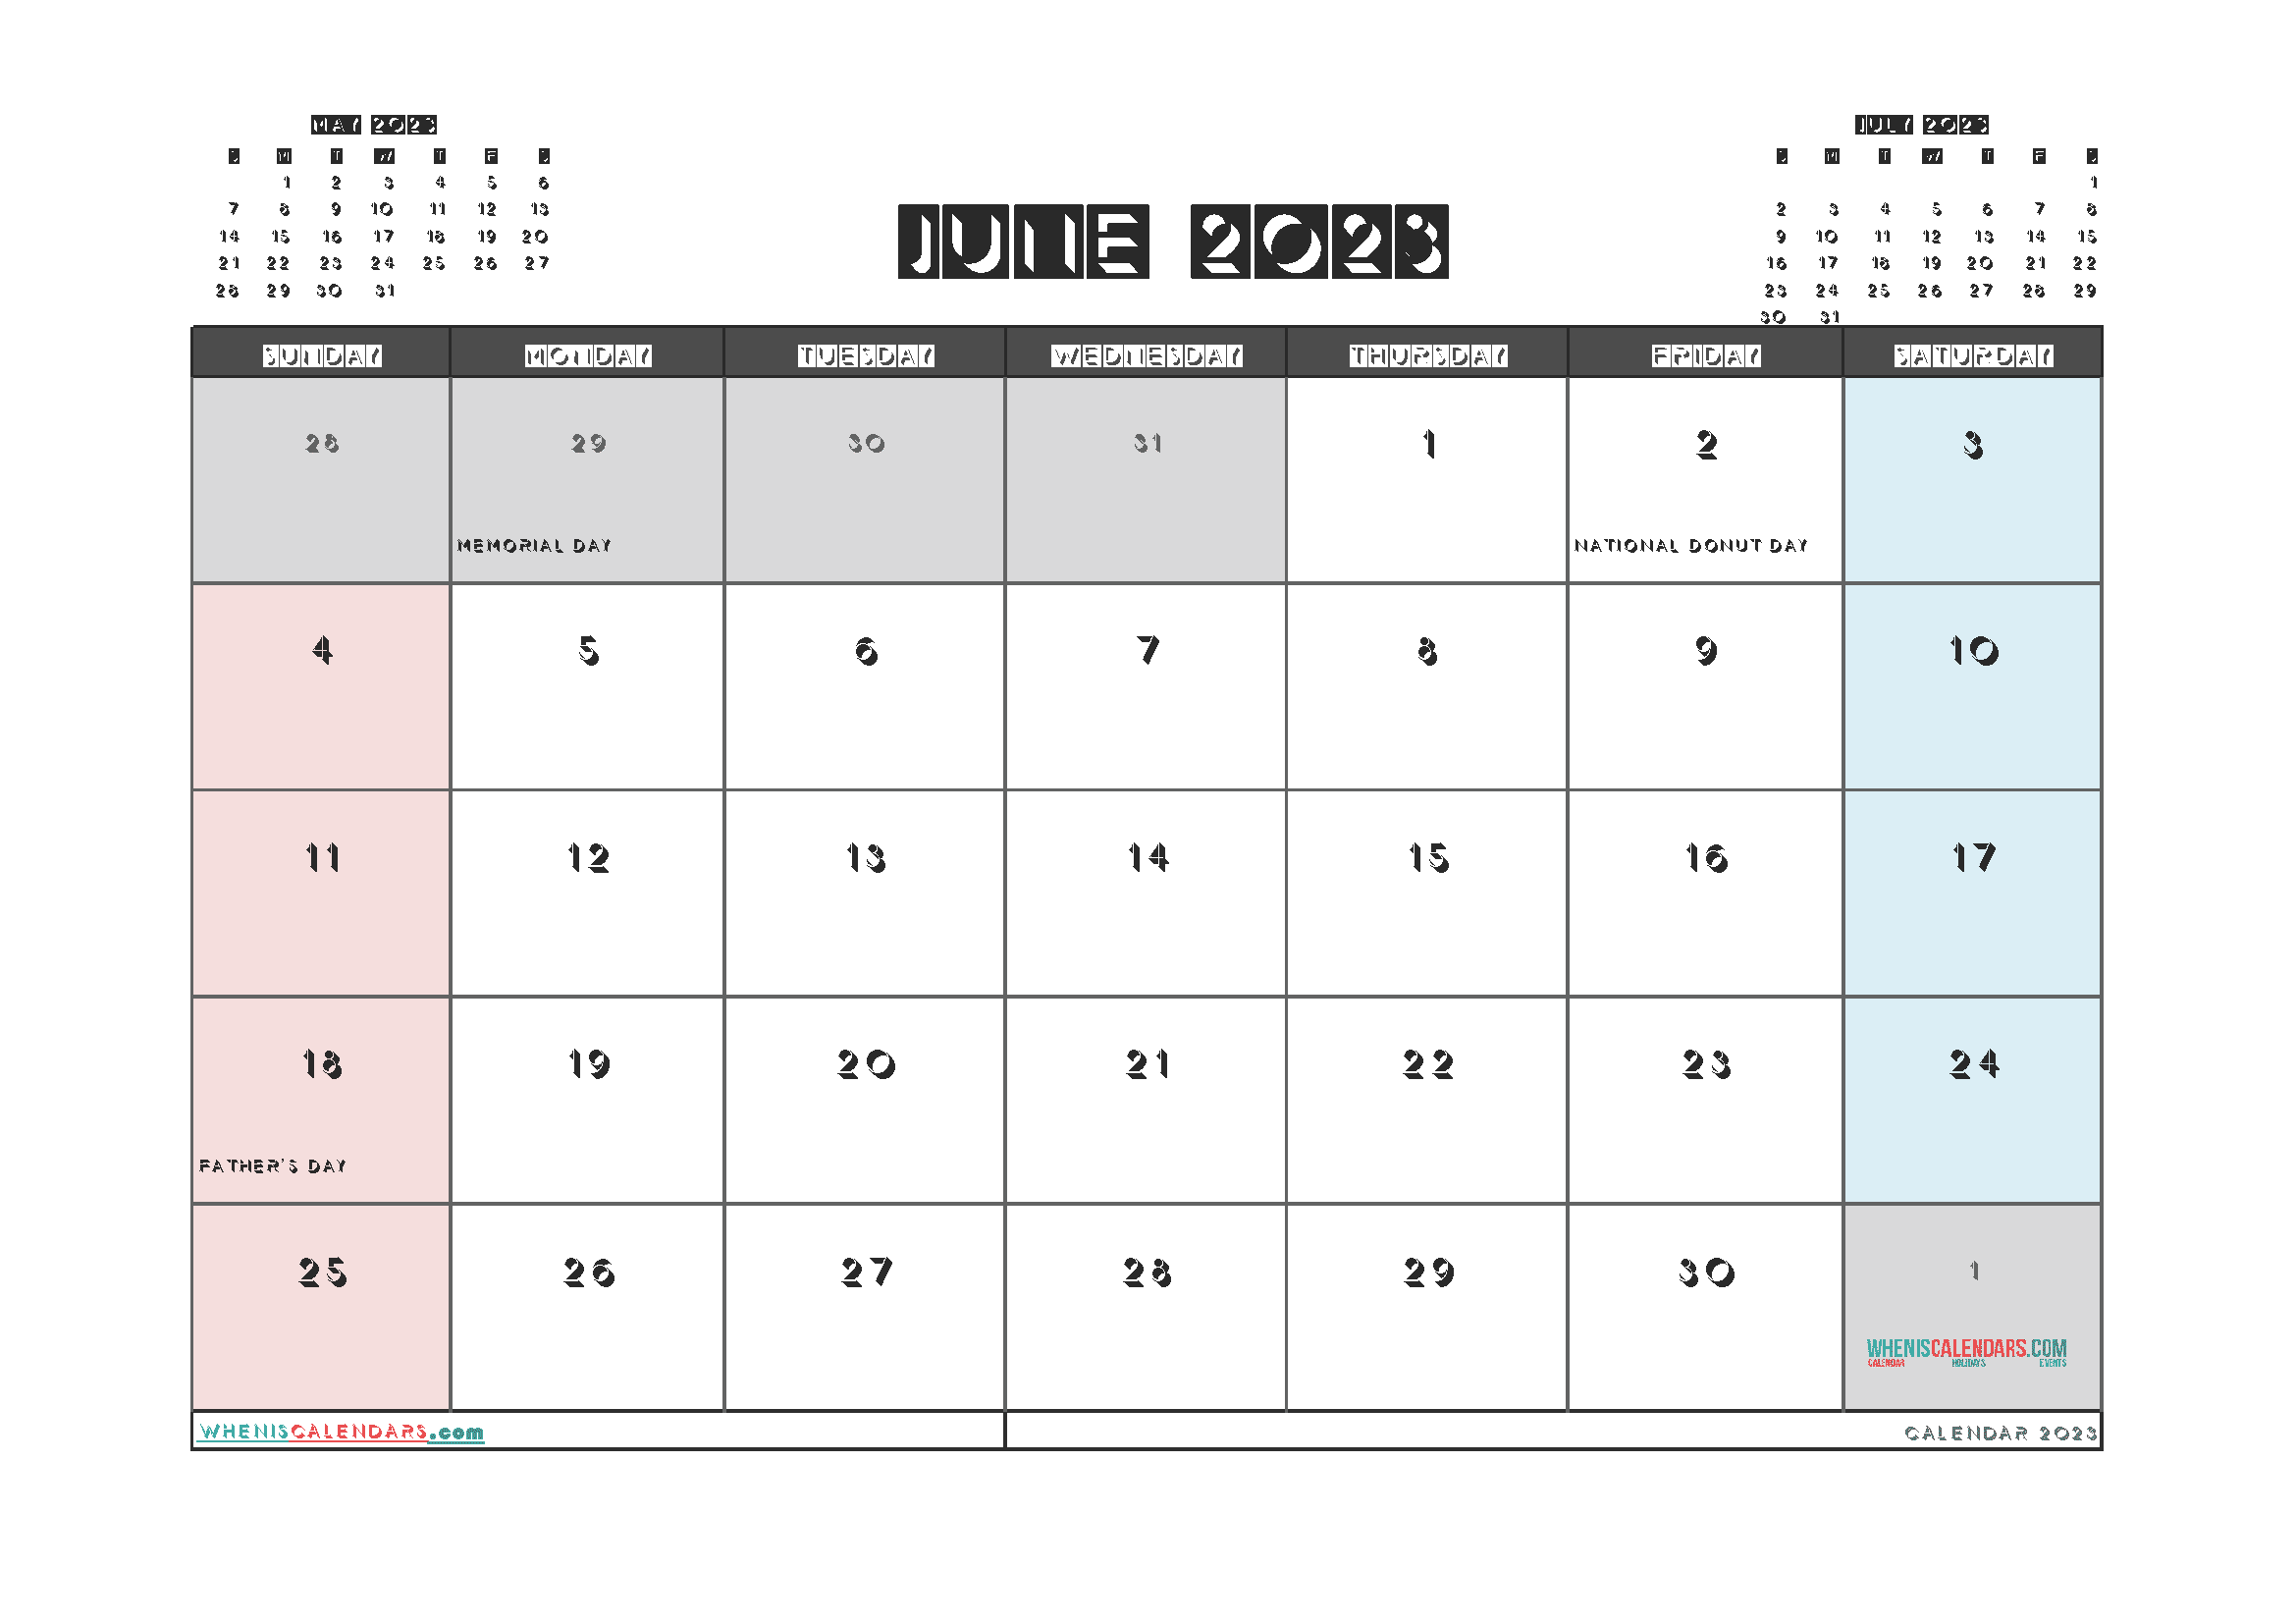 Free Printable Calendar June 2023 with Holidays PDF in Landscape